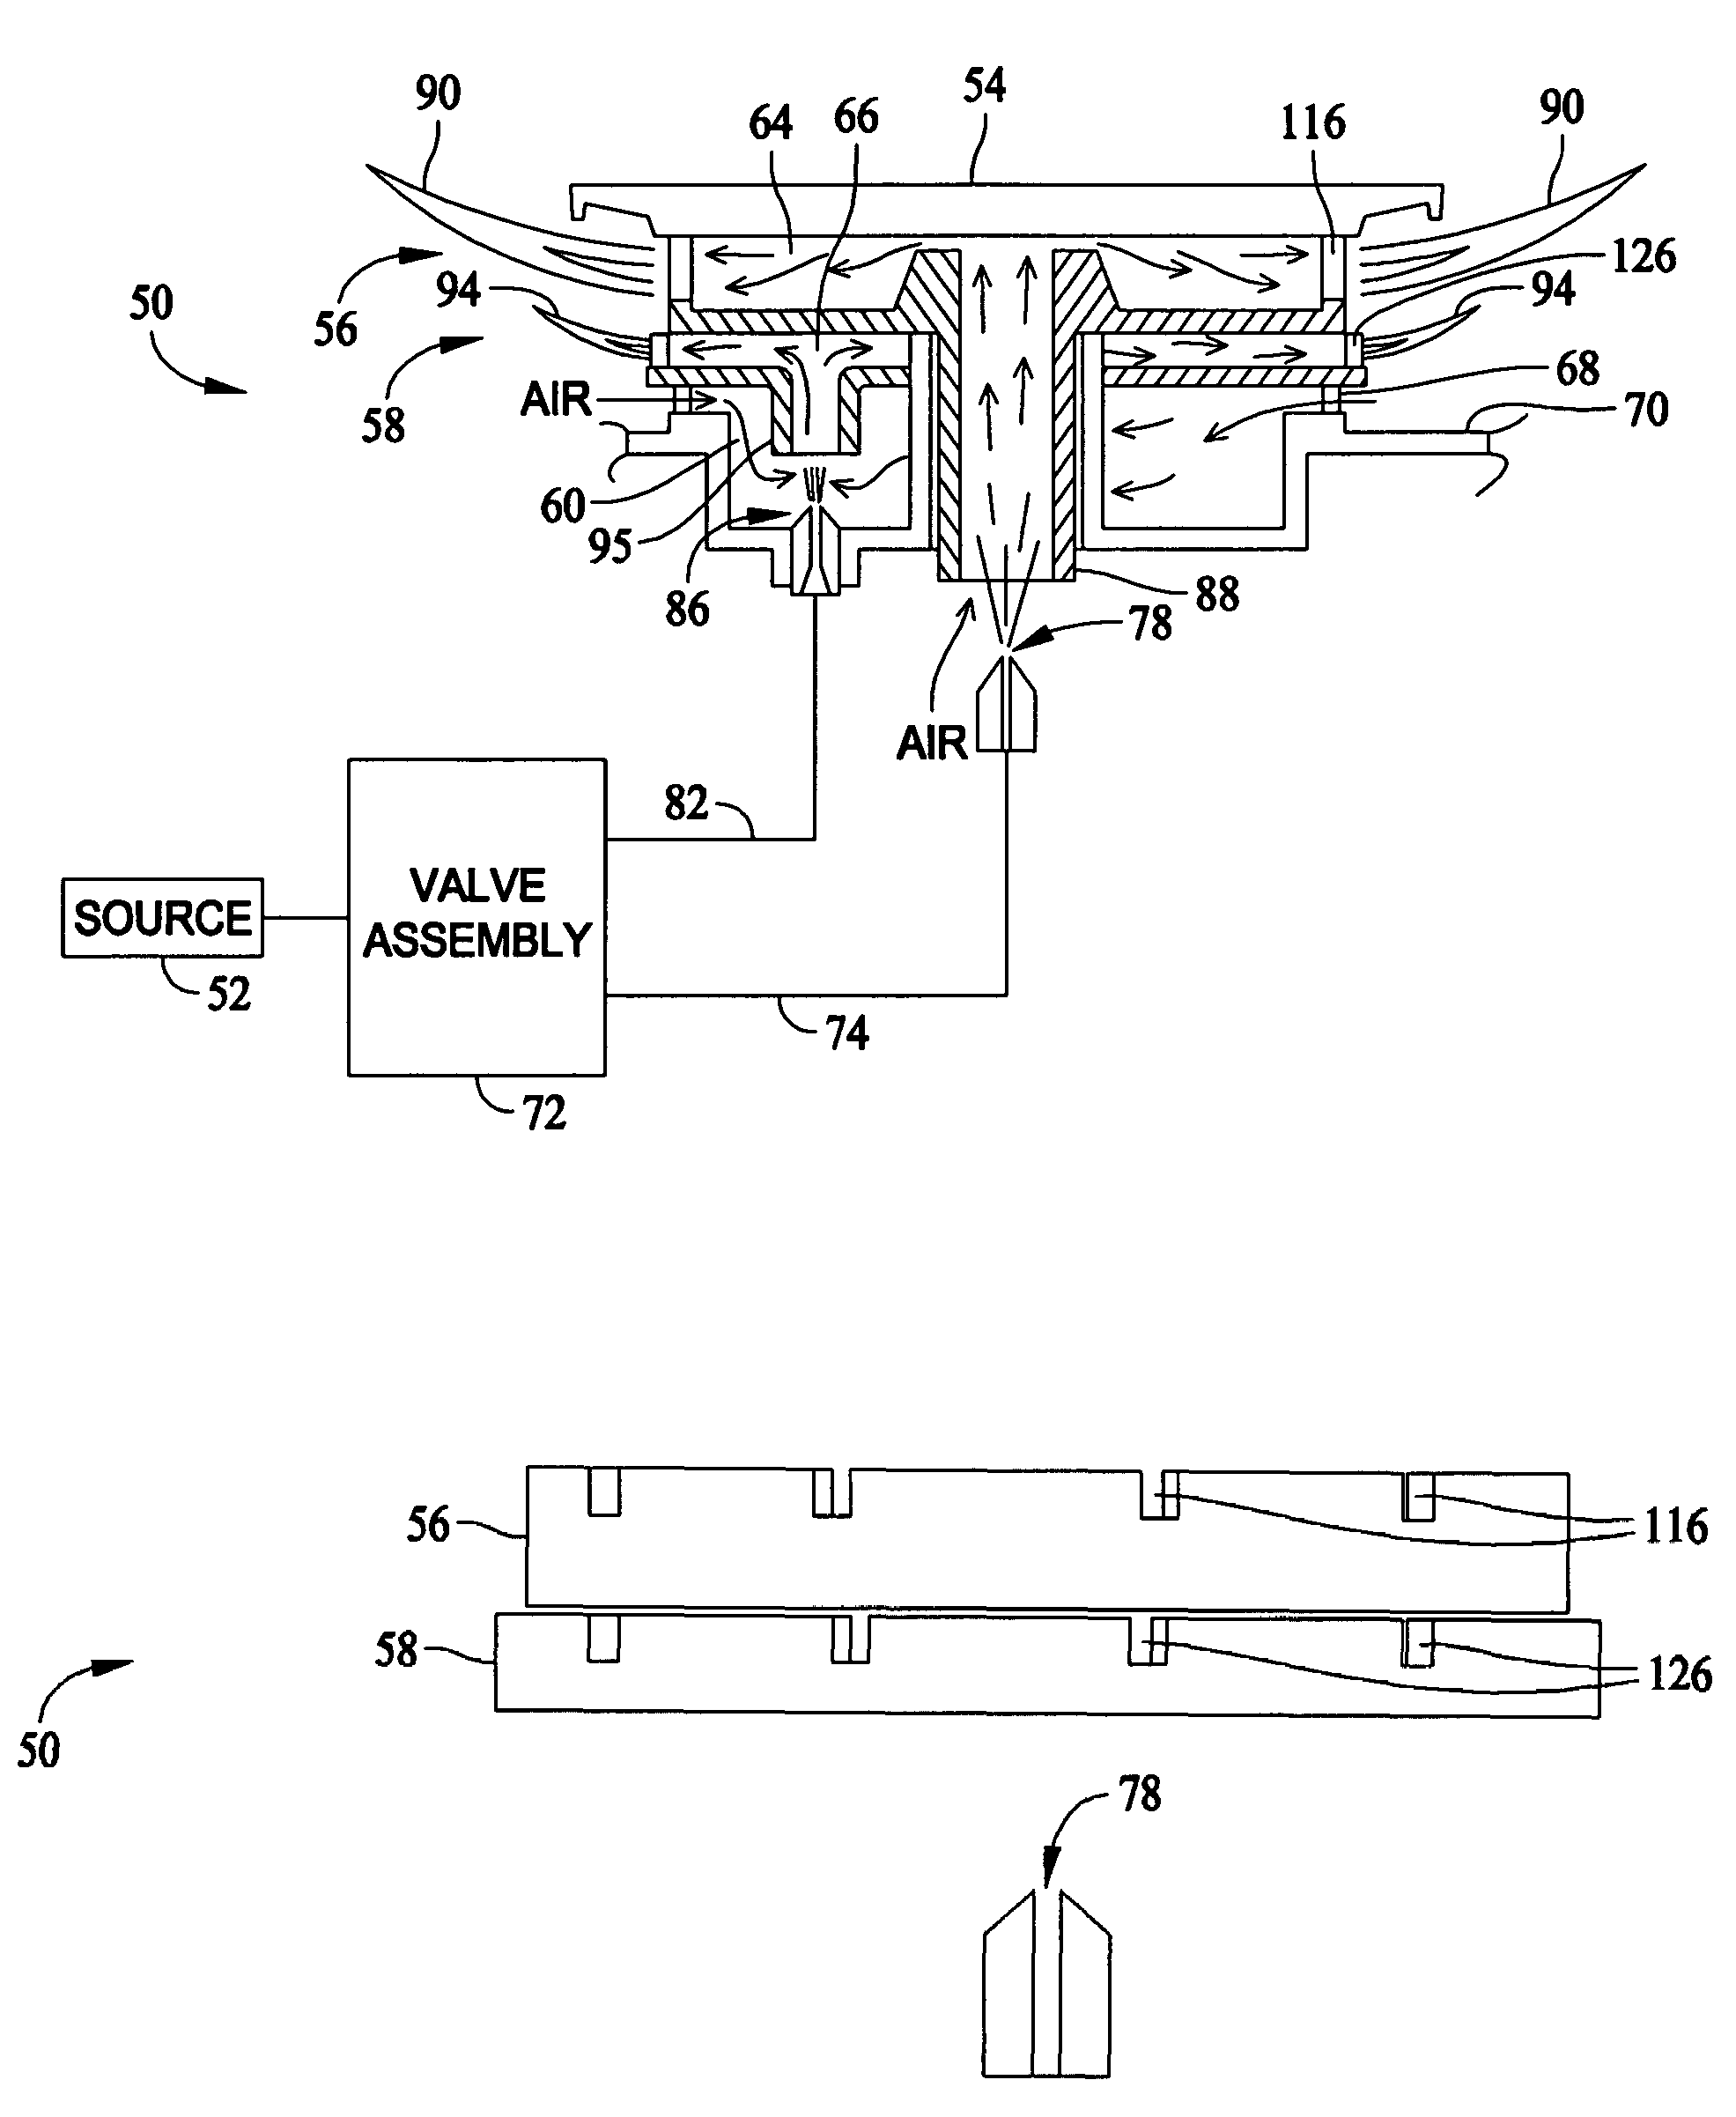 Dual stacked gas burner and a venturi for improving burner operation